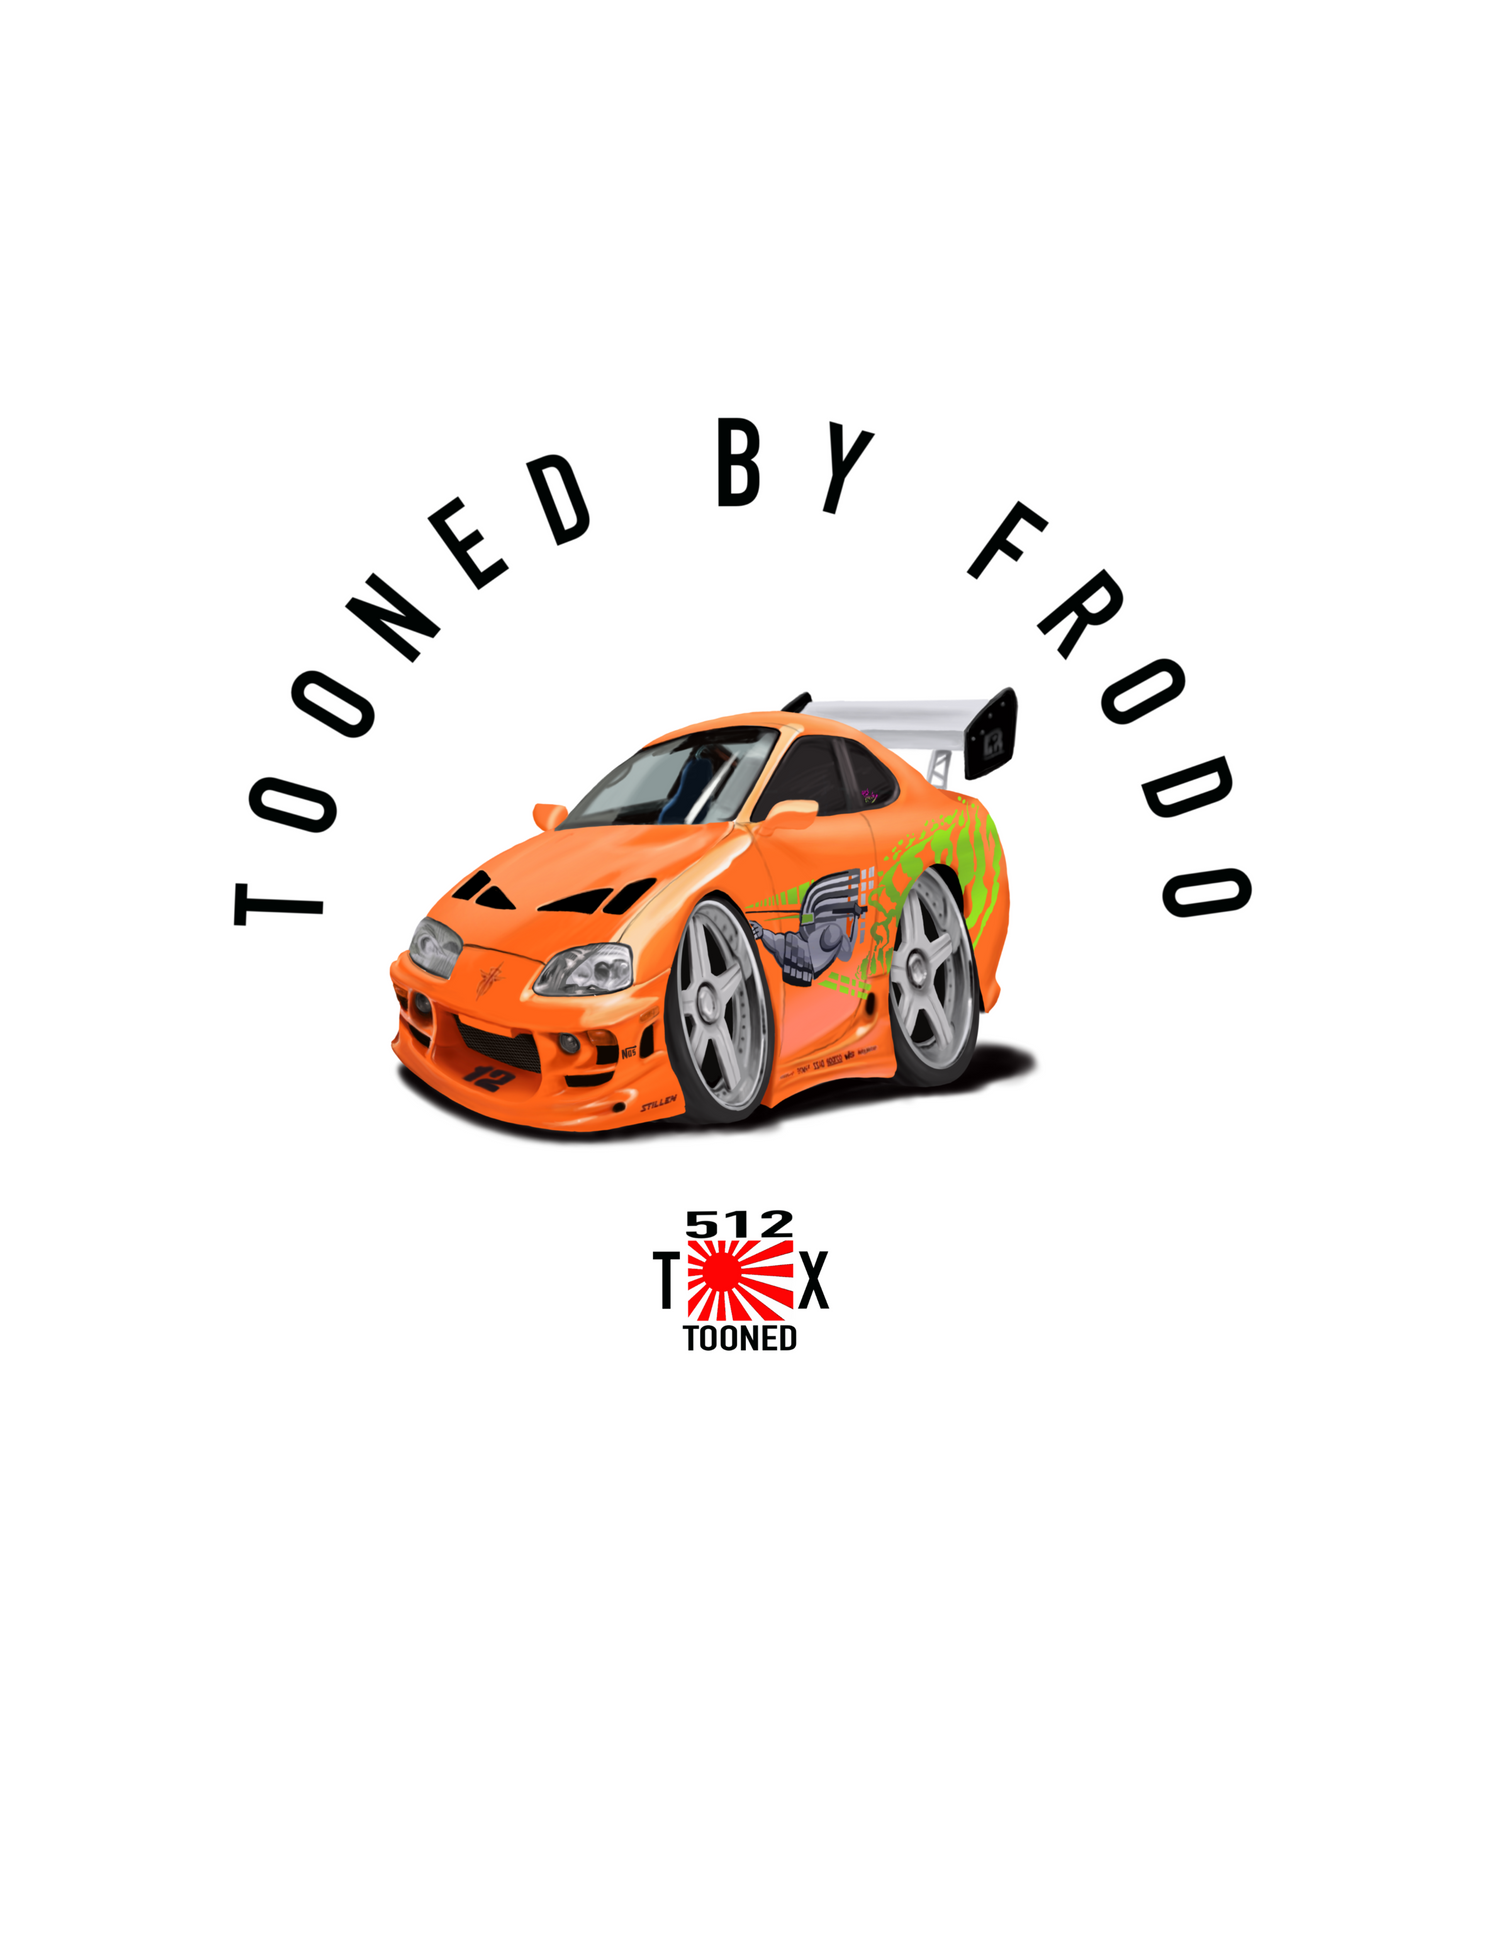 Tooned by Frodo